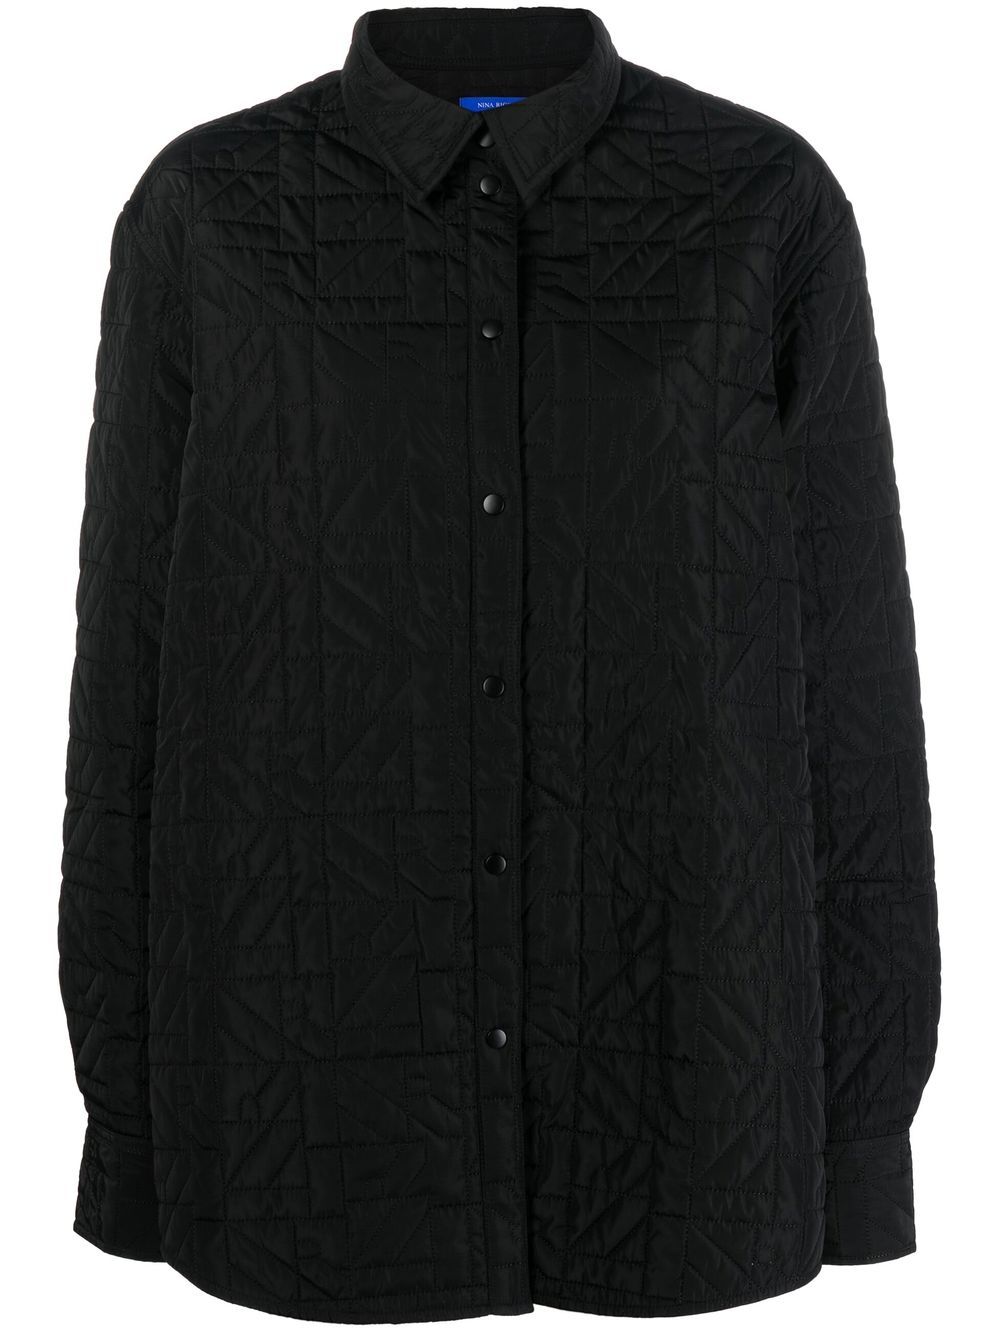 Image 1 of Nina Ricci quilted button-up shirt